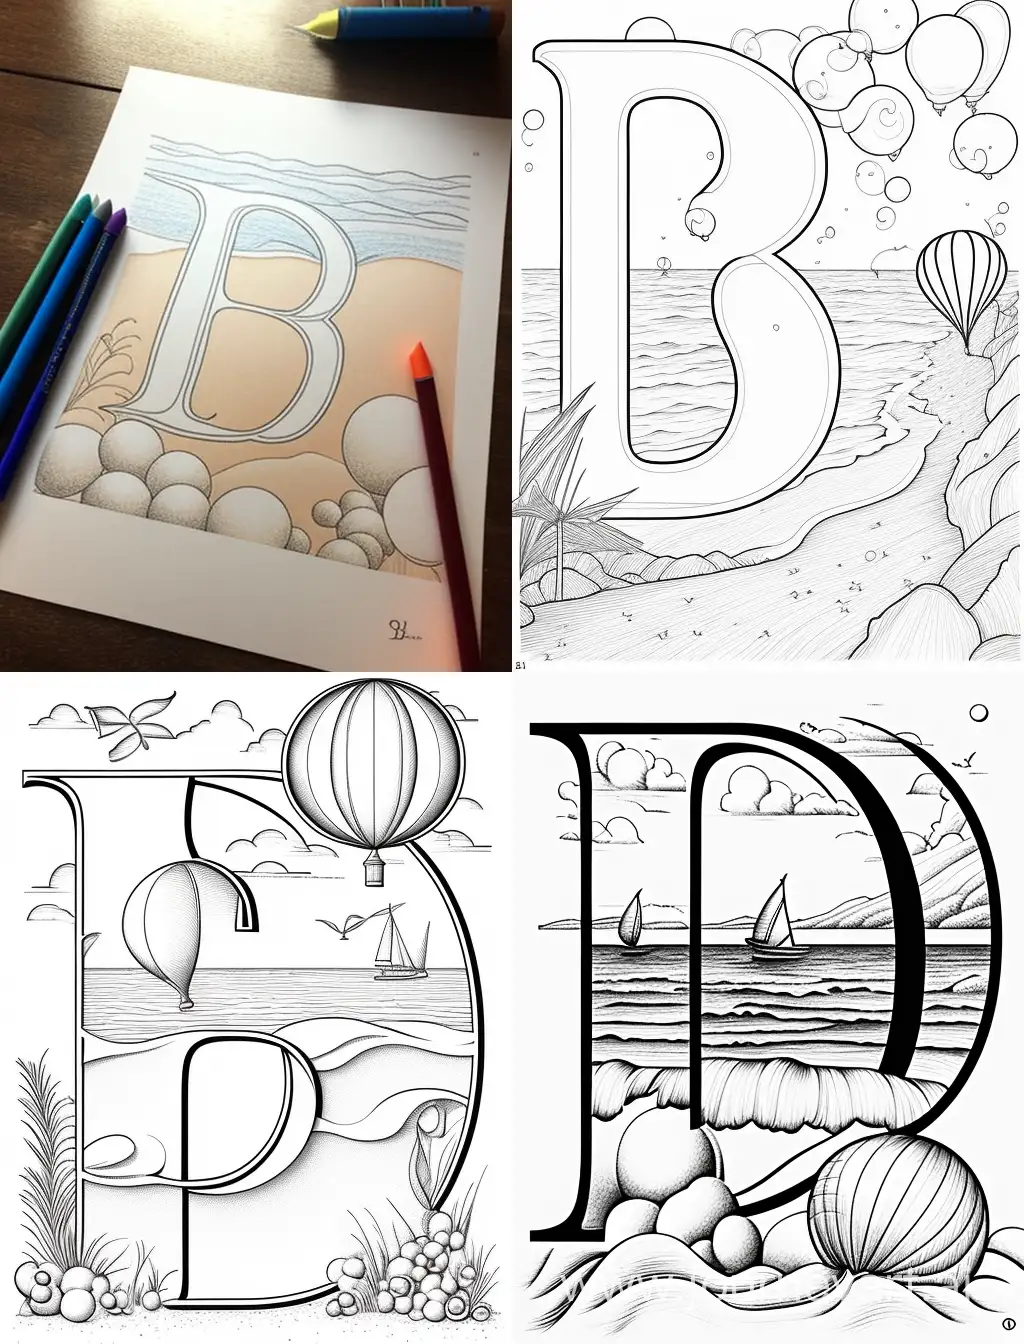 Handwritten-Large-Letter-B-with-Beach-Ball-Outlines